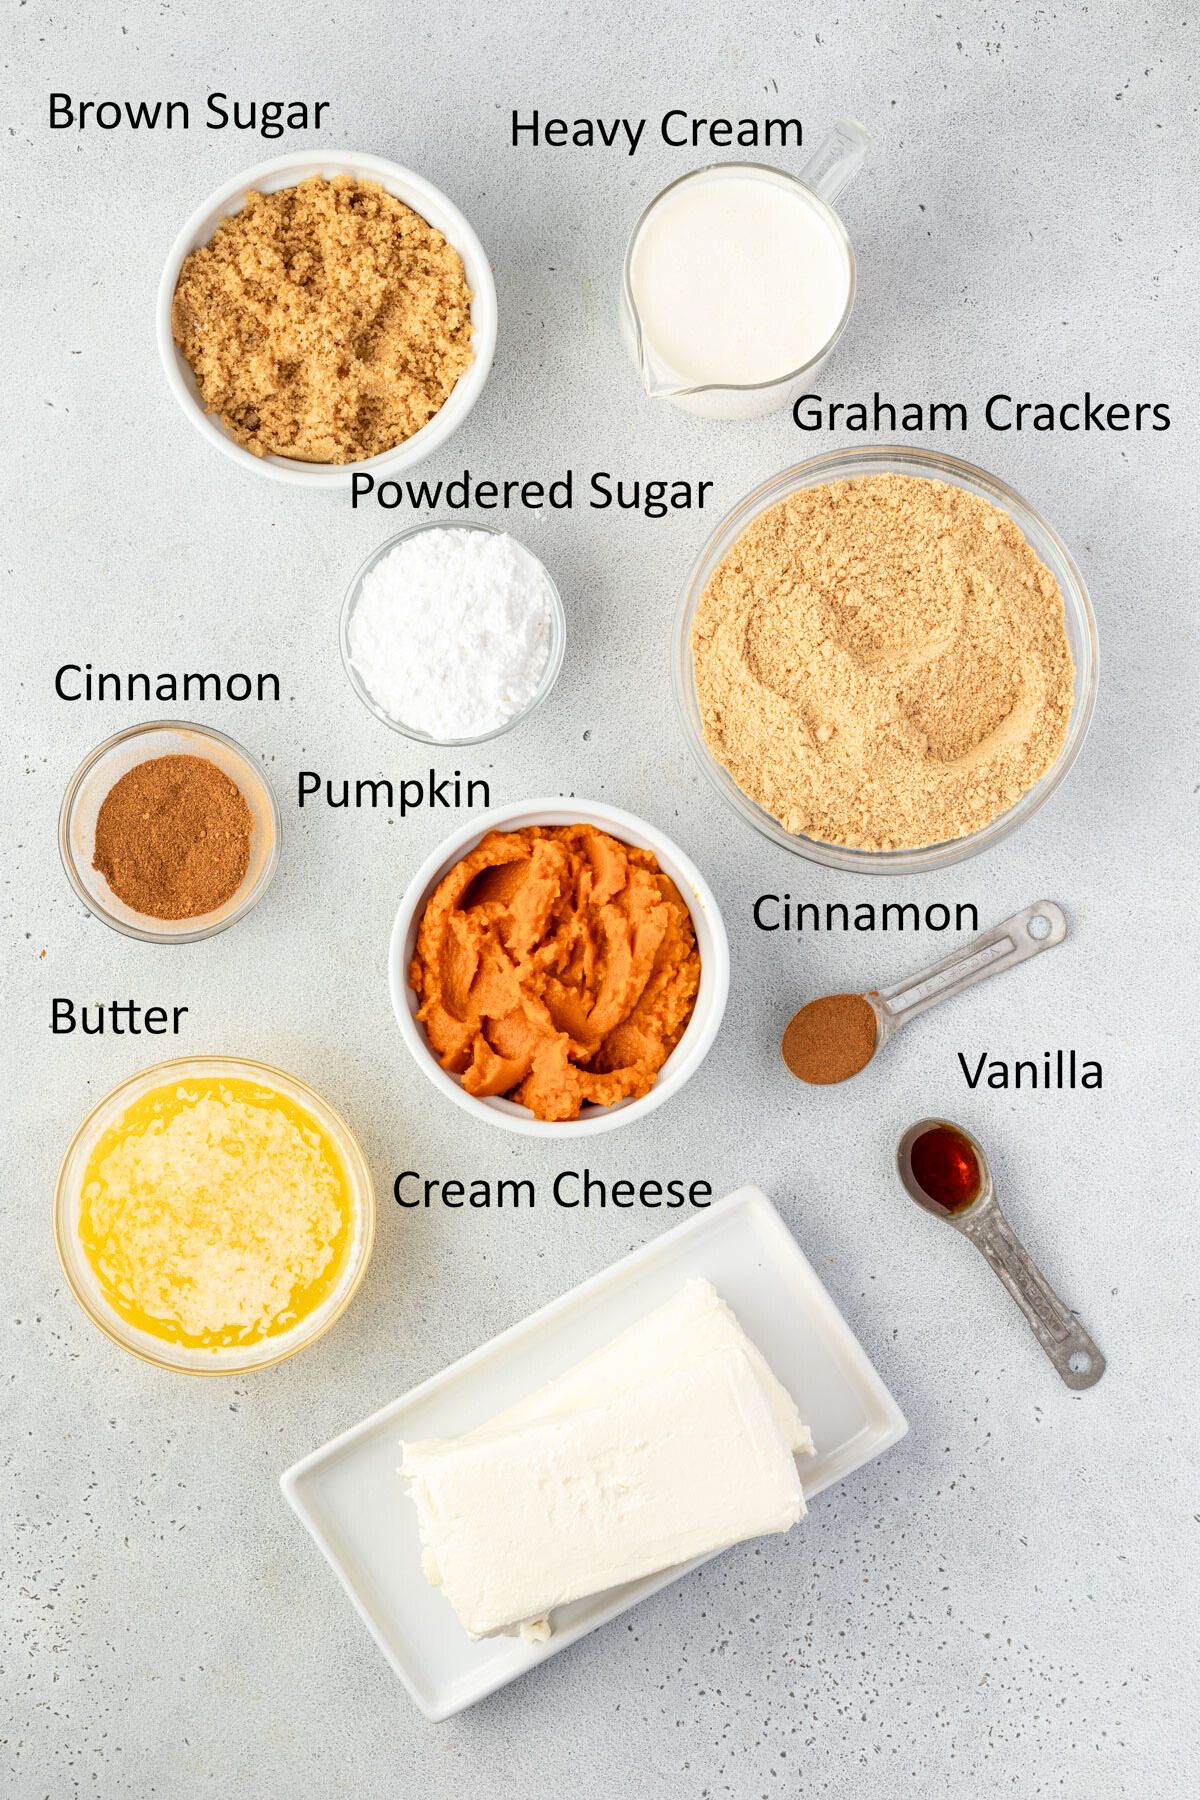 The recipe ingredients each in individual bowls.